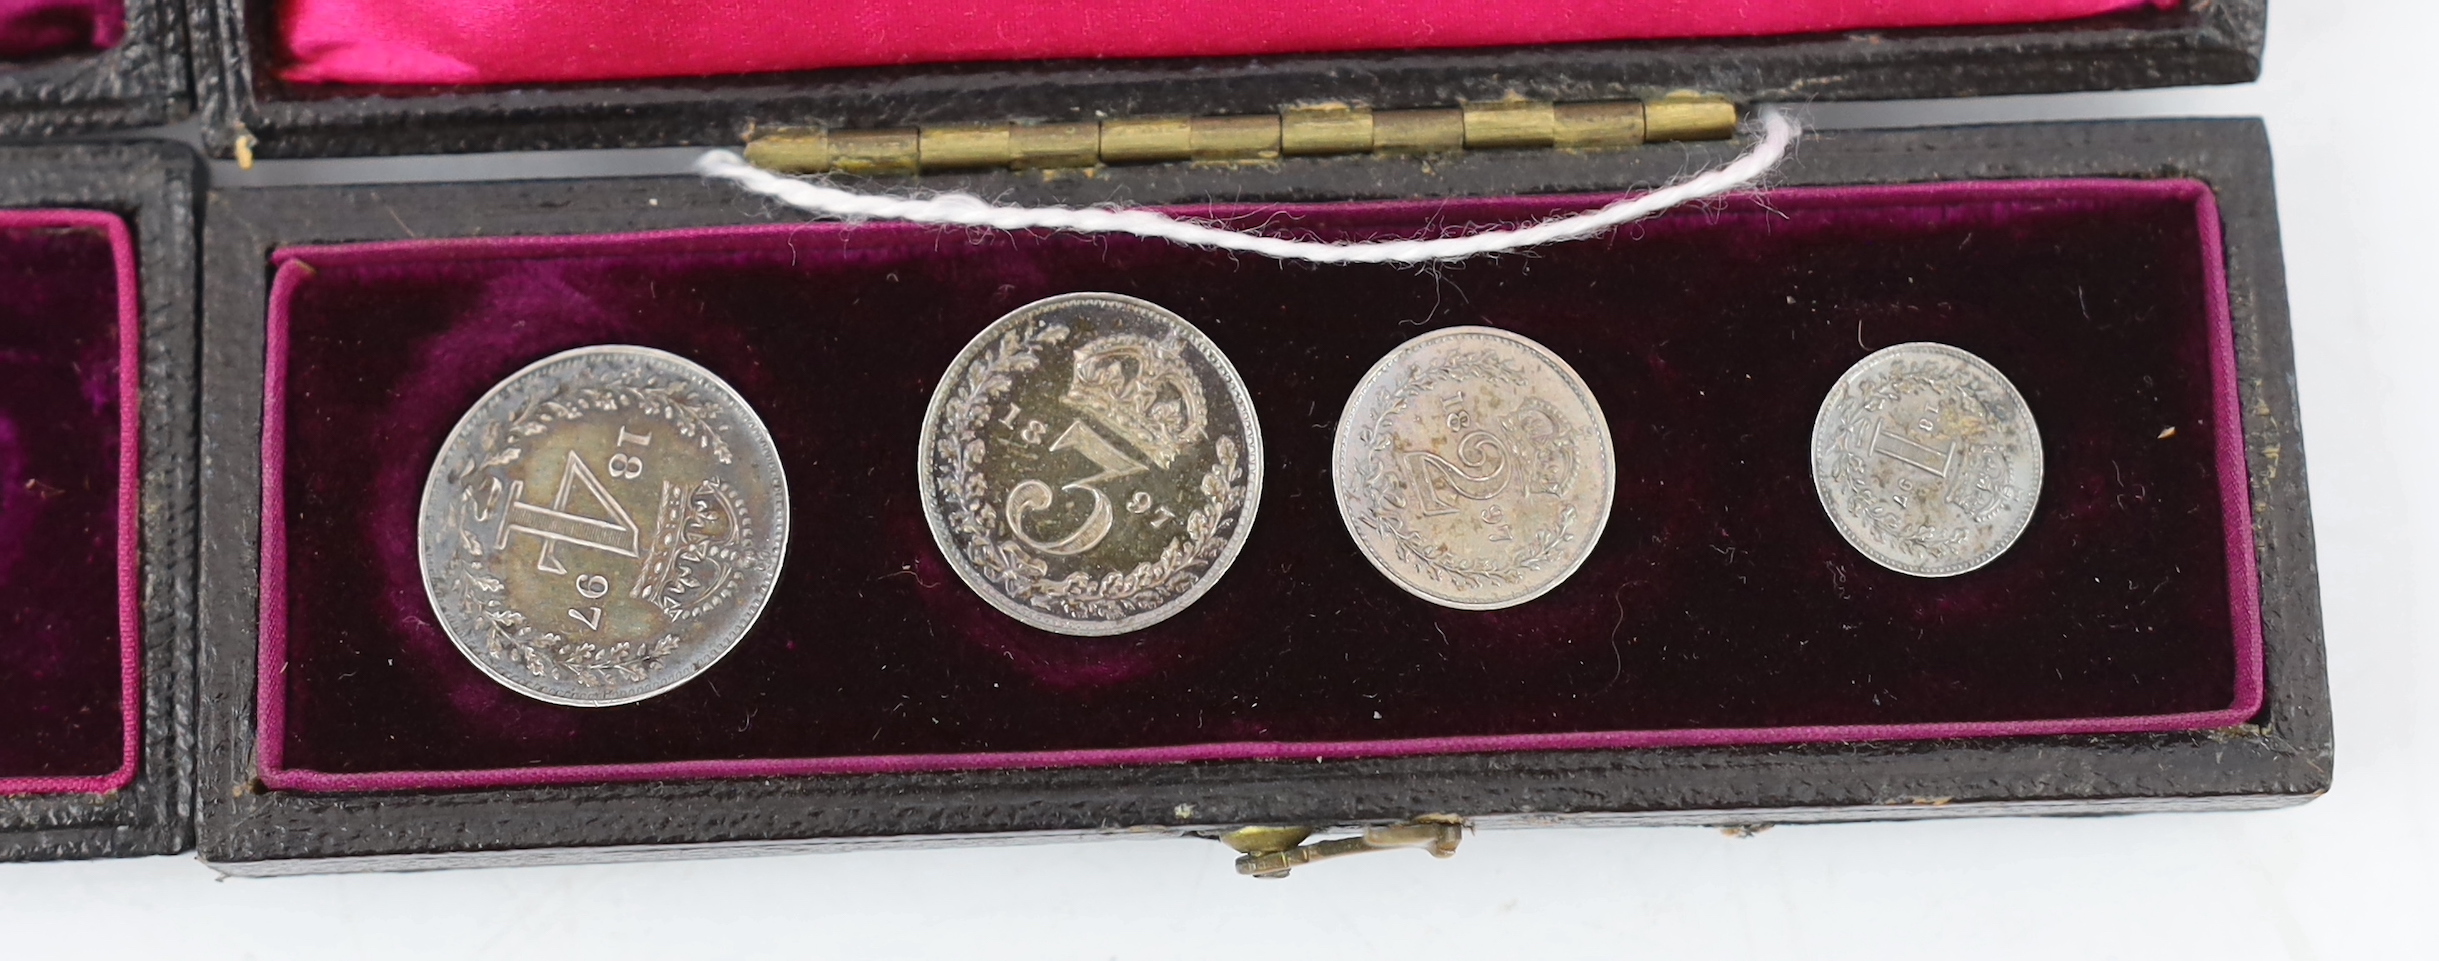 British coins, cased Victoria maundy coin set 1897, and cased Edward VII maundy coin set 1903 (2 cases)